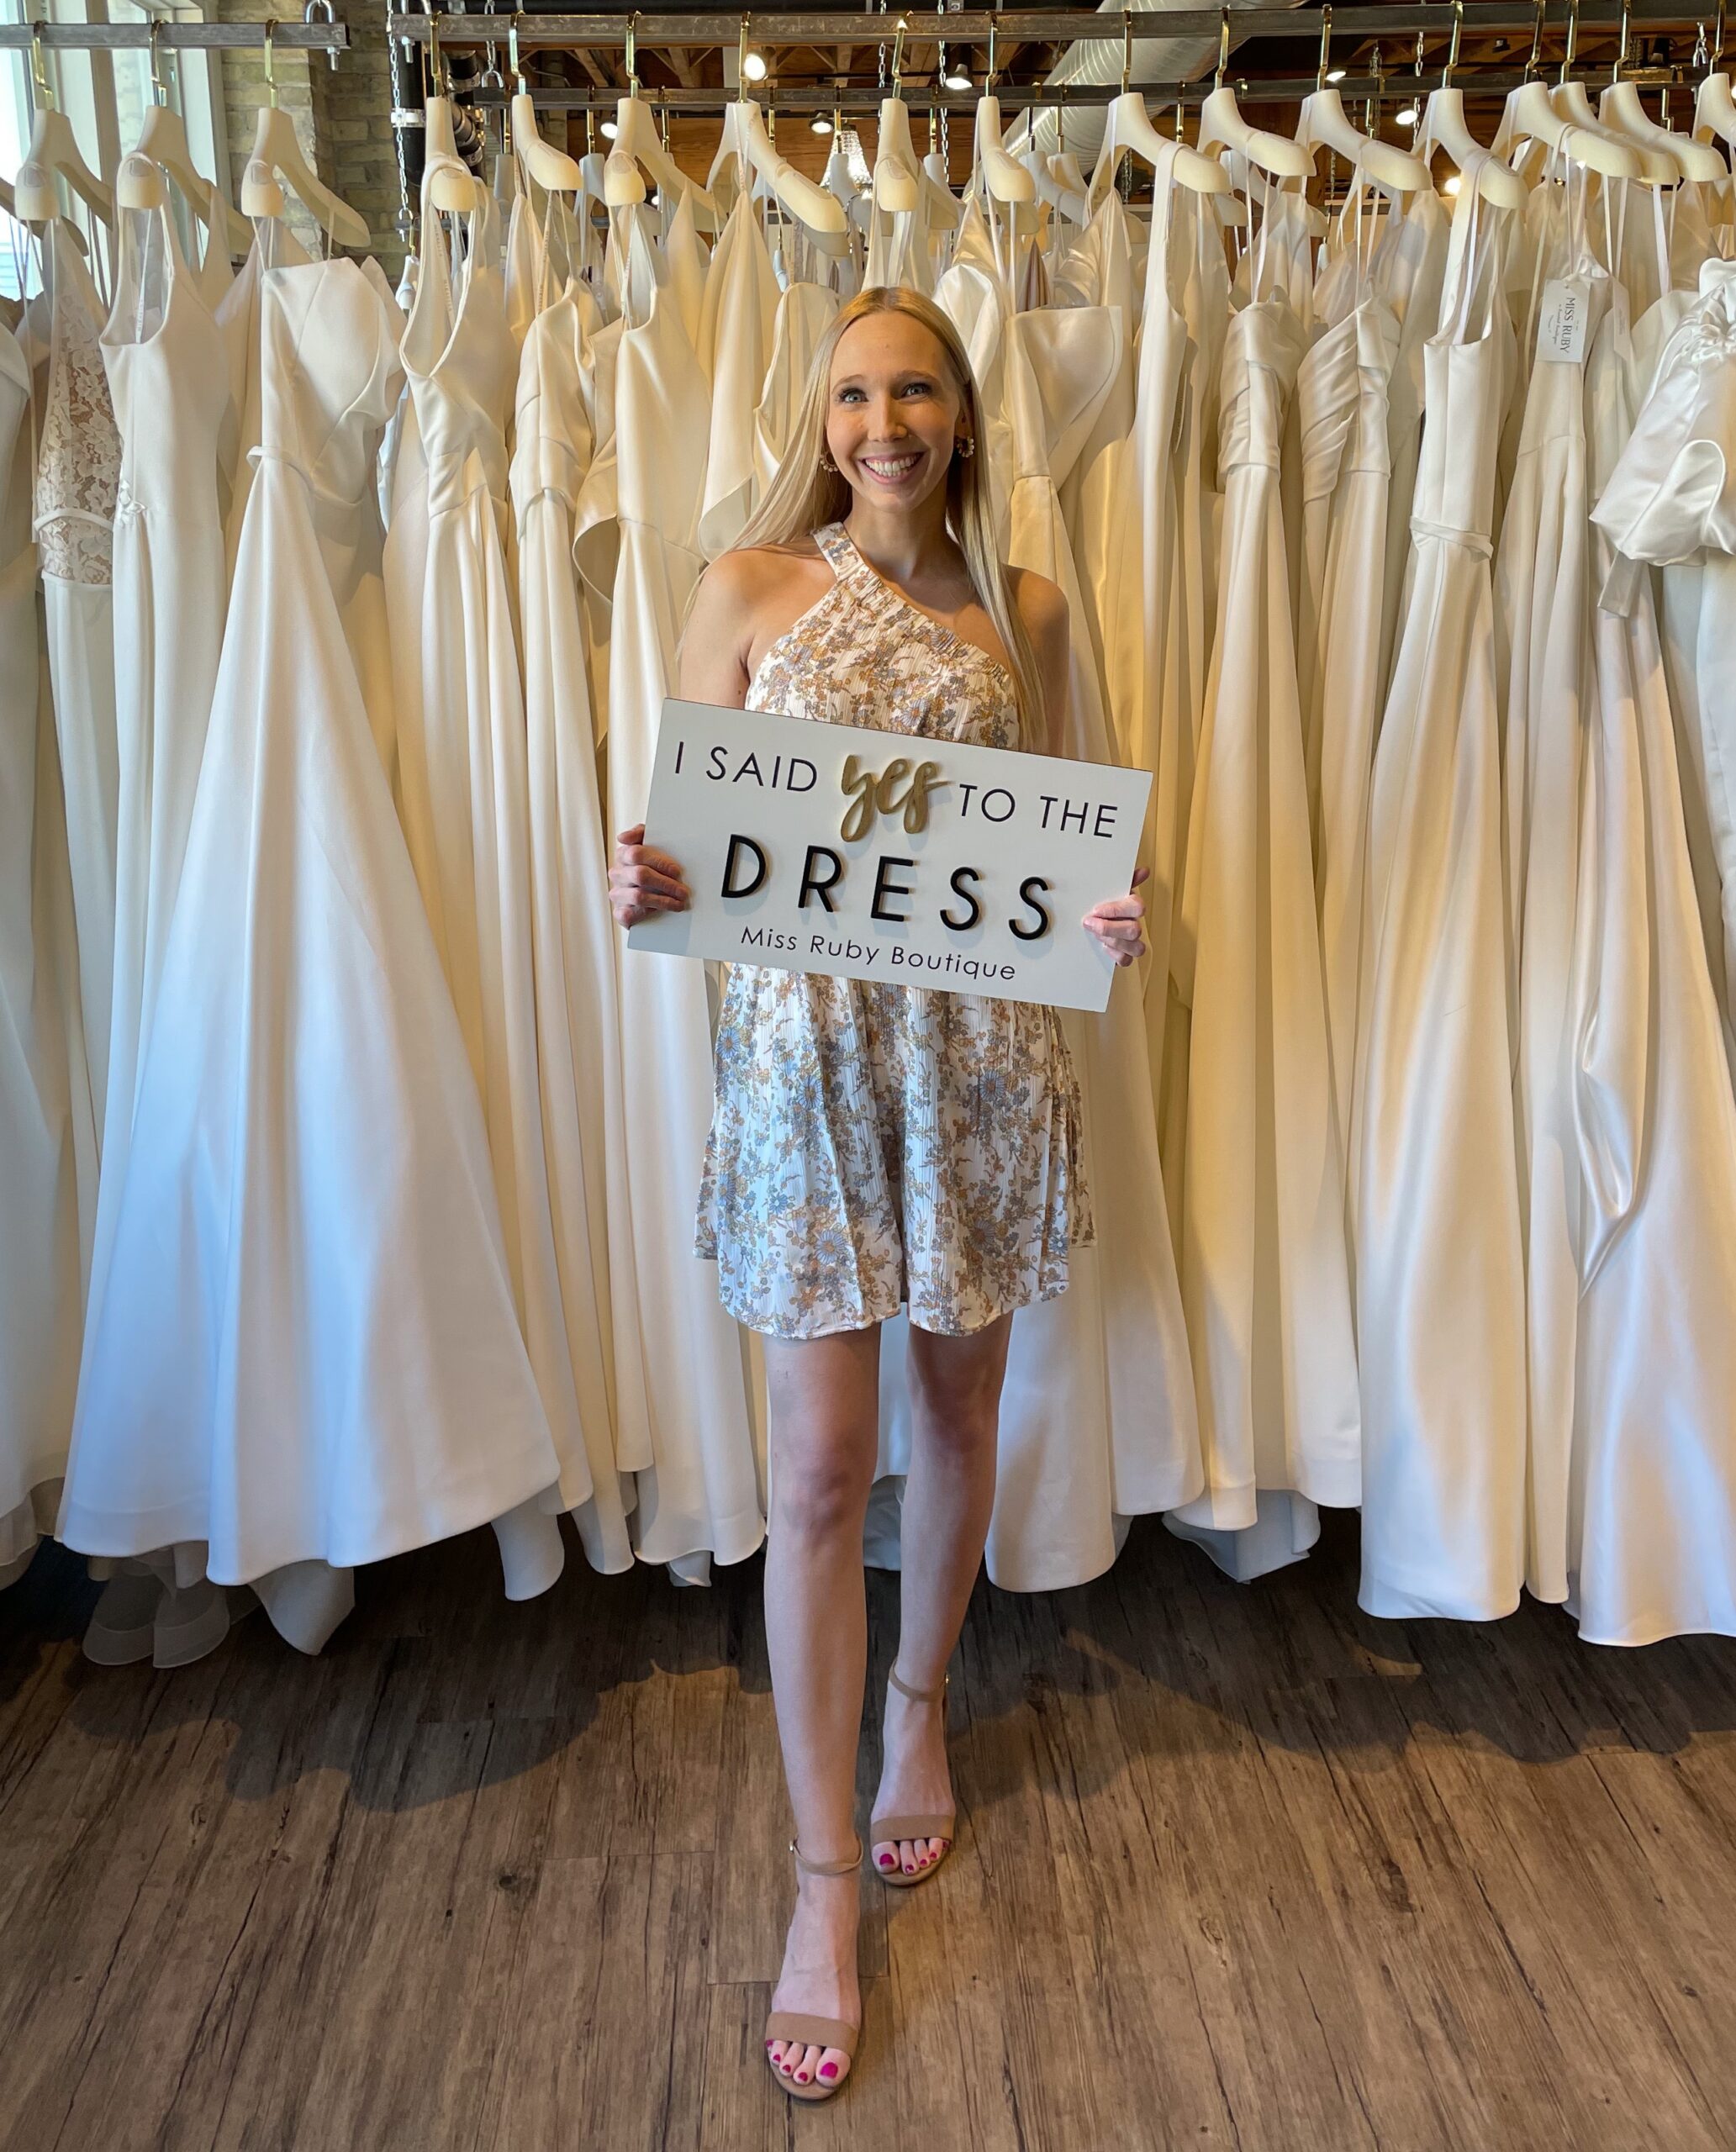 What to Wear Wedding Dress Shopping: Things to Bring + What I Wish I Knew!  - Sunday Mimosas